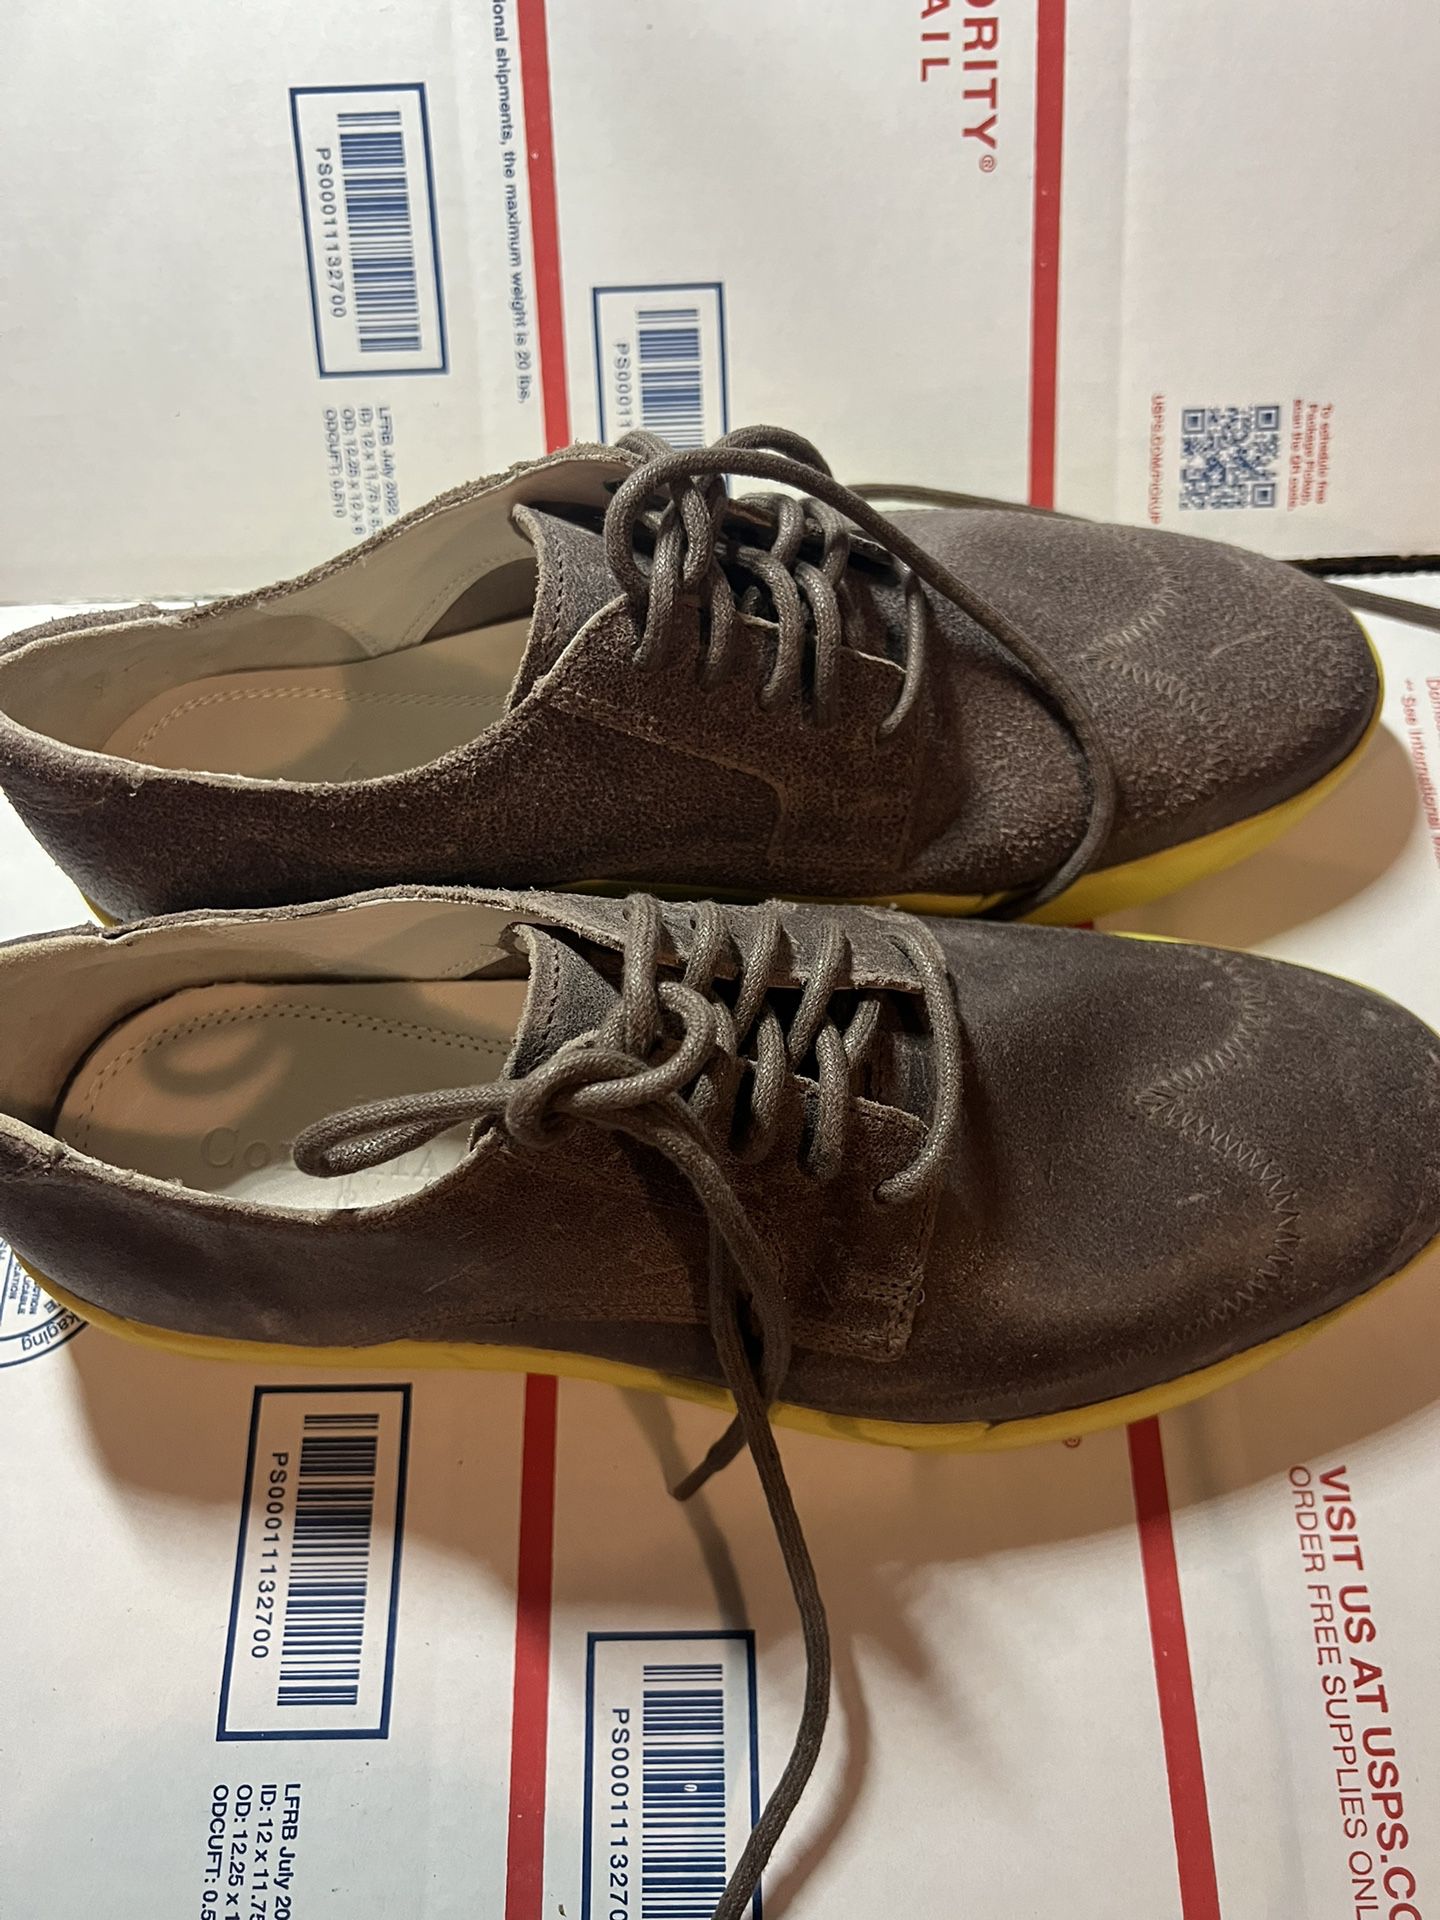 New Cole Haan x Nike Air Lot Brown Teal Leather Wingtip Oxford Shoes Mens Size for in Wolcott, CT OfferUp